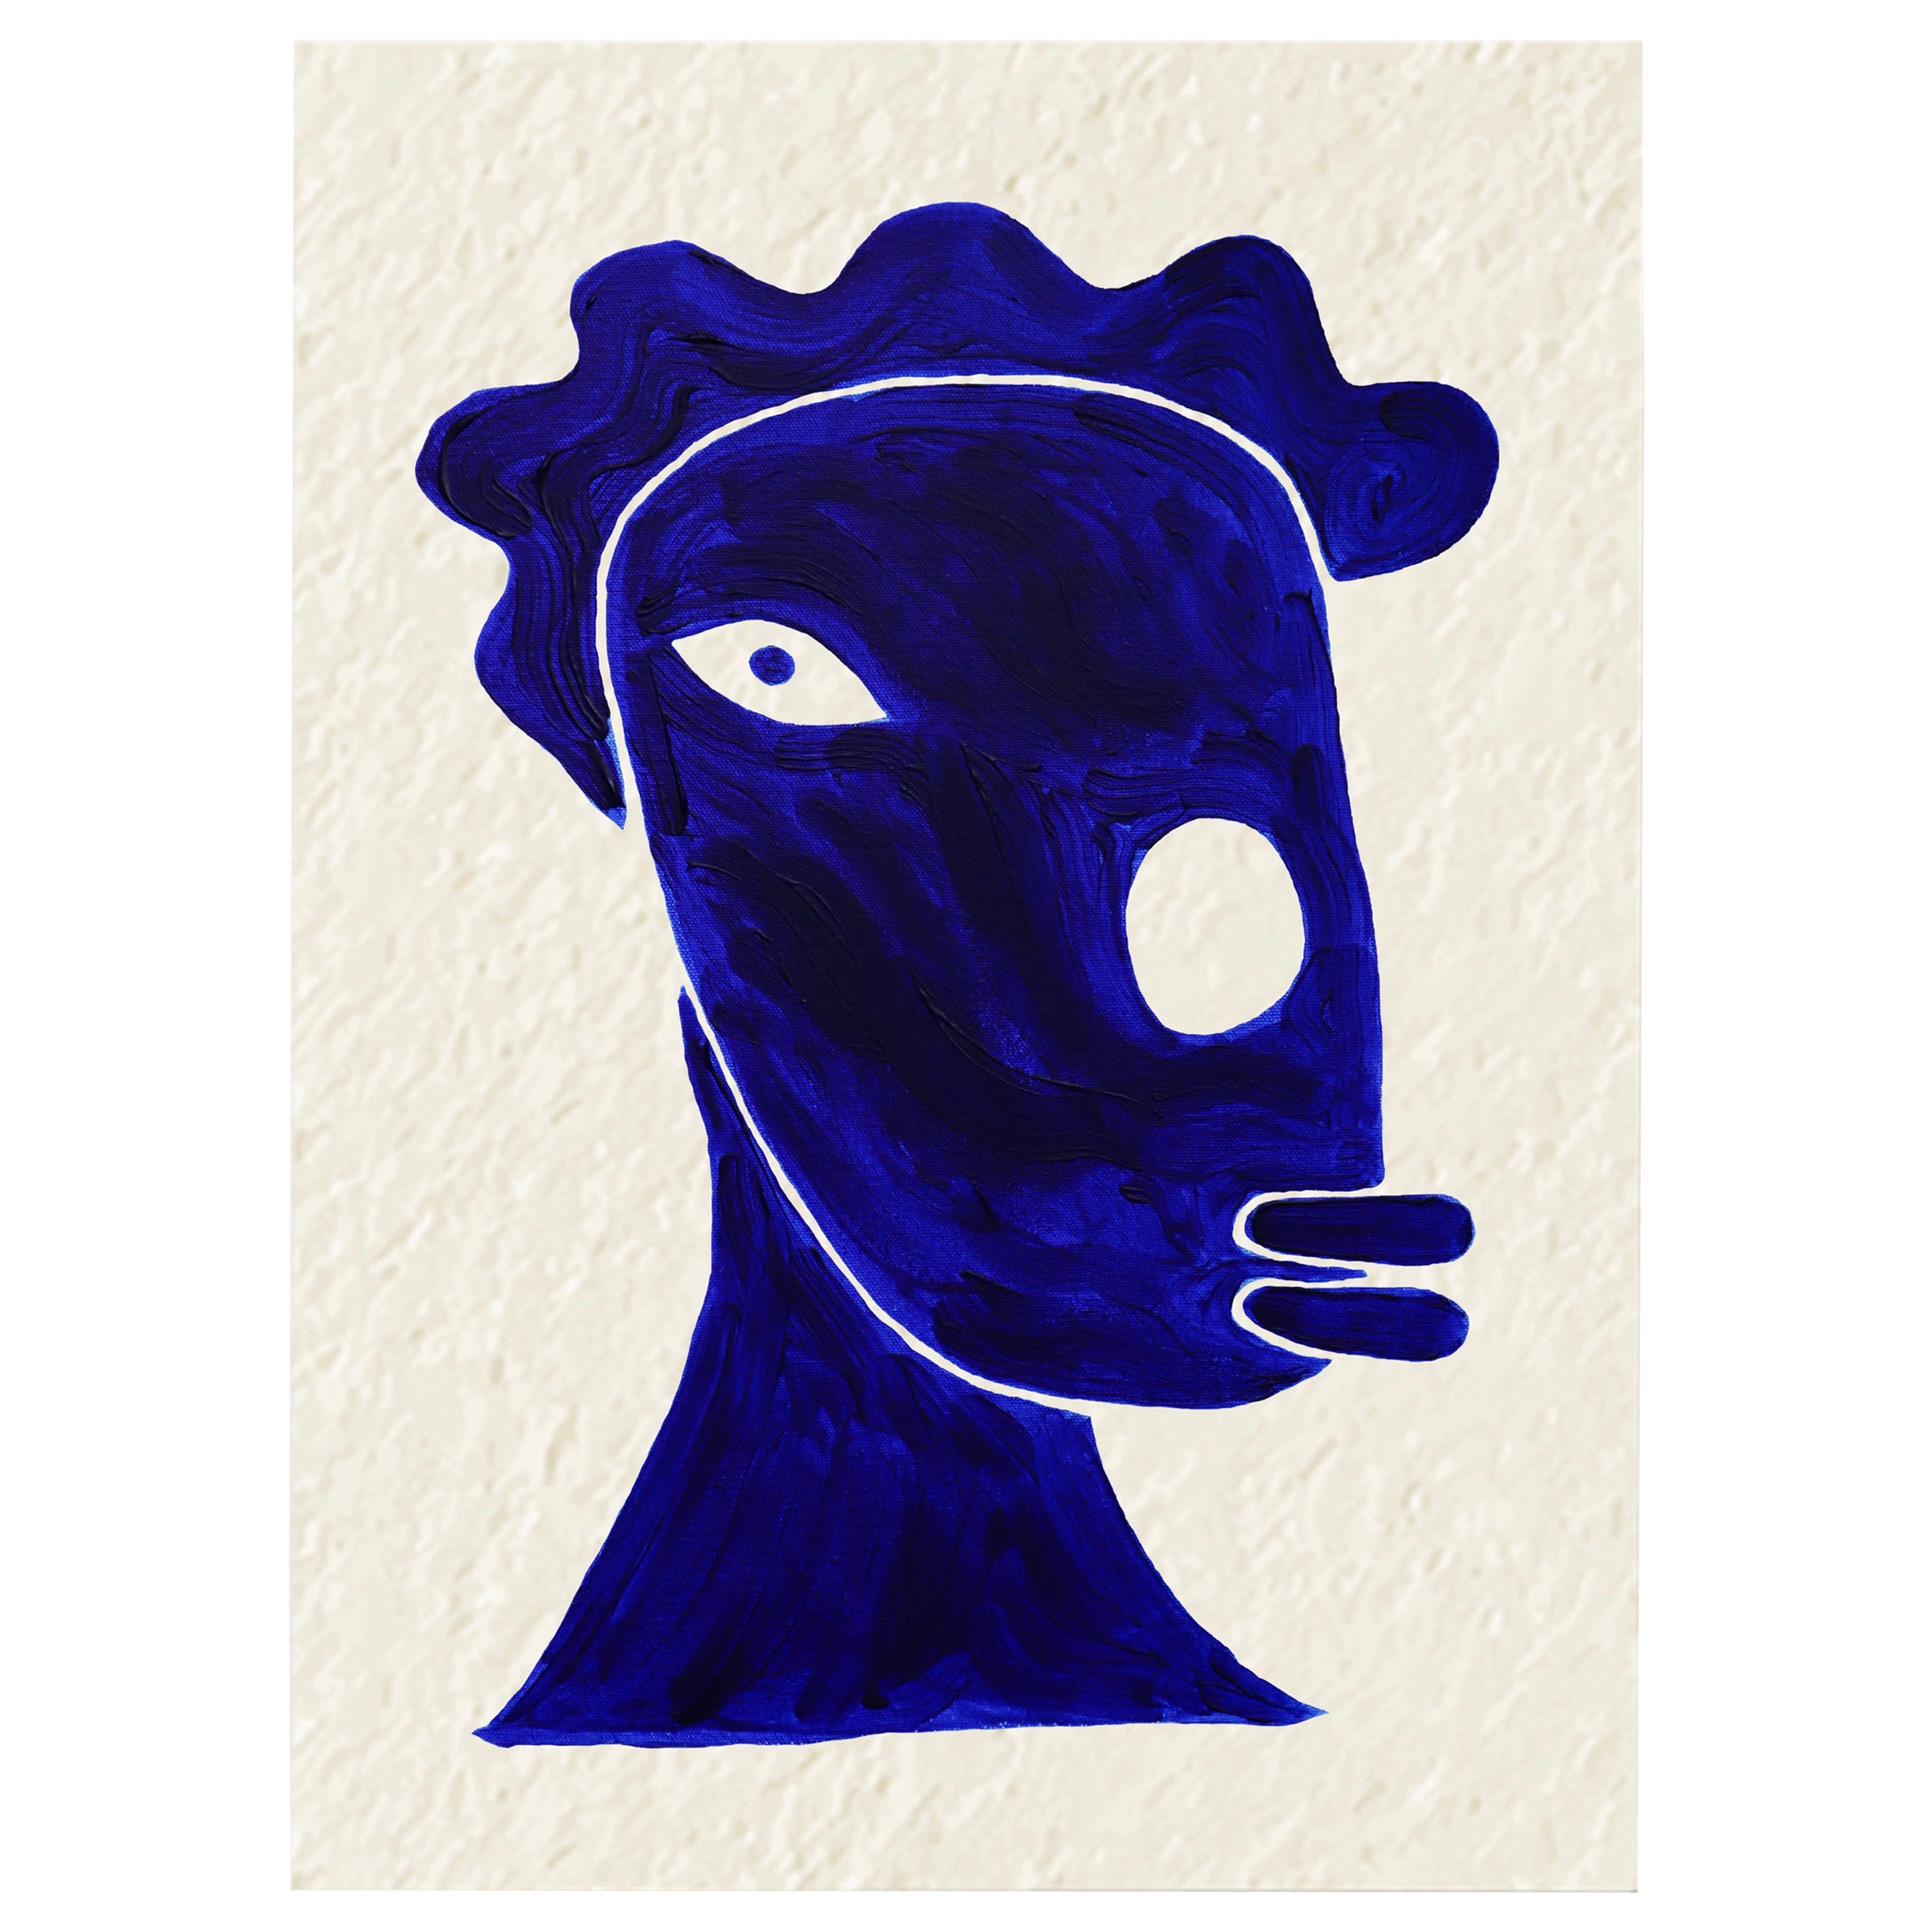 Yow Blue African Contemporary Print on Giclée Hahnemühle Abstract Expressionism